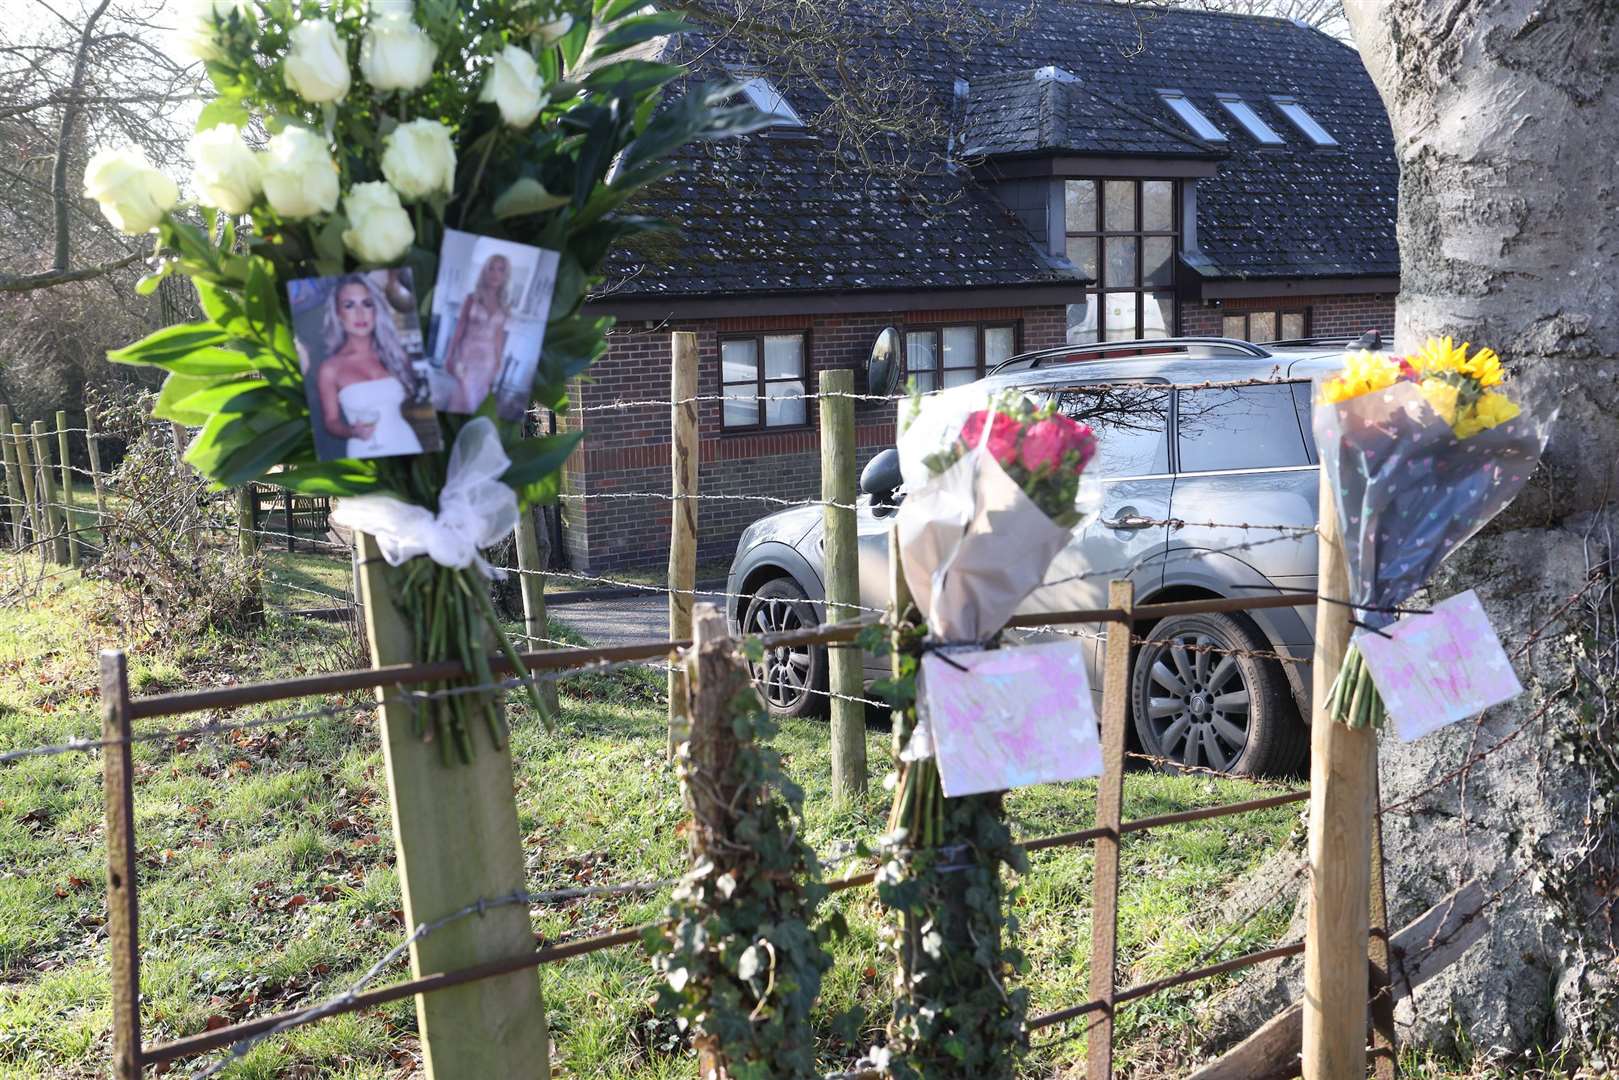 Floral tributes at the scene near Farningham, following a fatal crash. Images: UKNIP